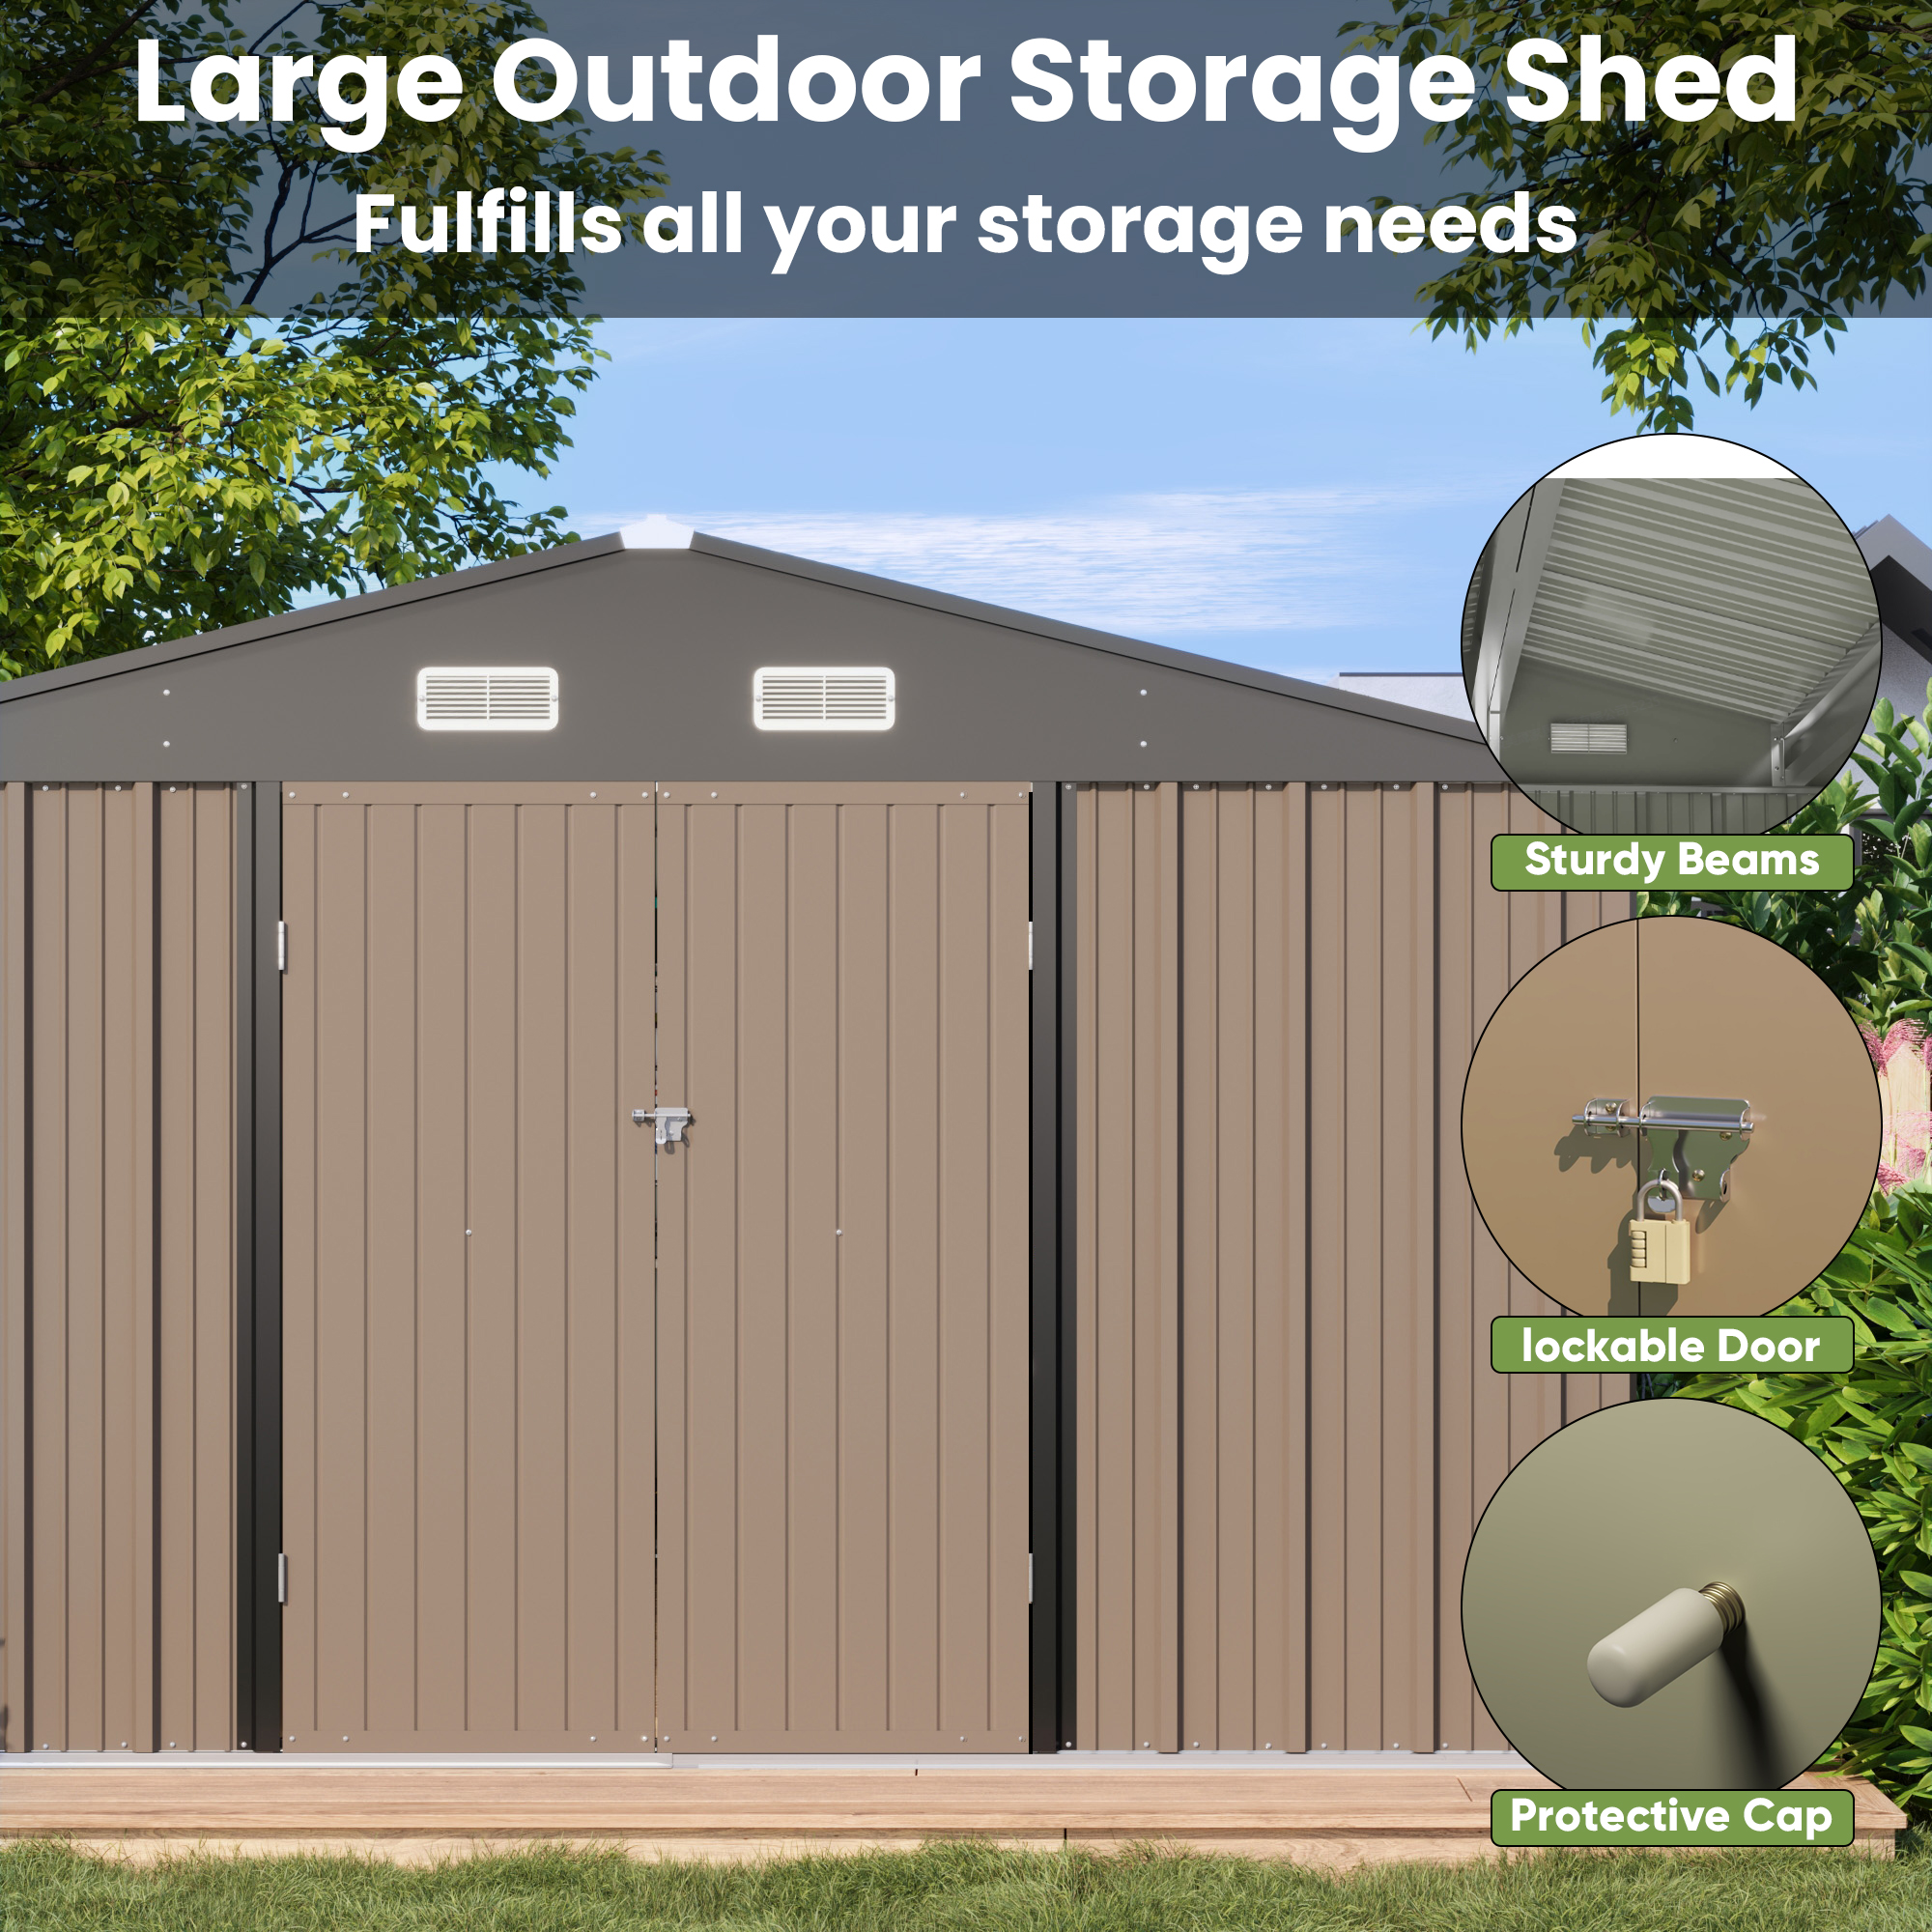 Patiowell Size Upgrade 10 x 10 ft Outdoor Storage Metal Shed with Sloping Roof and Double Lockable Door, Brown - image 4 of 7